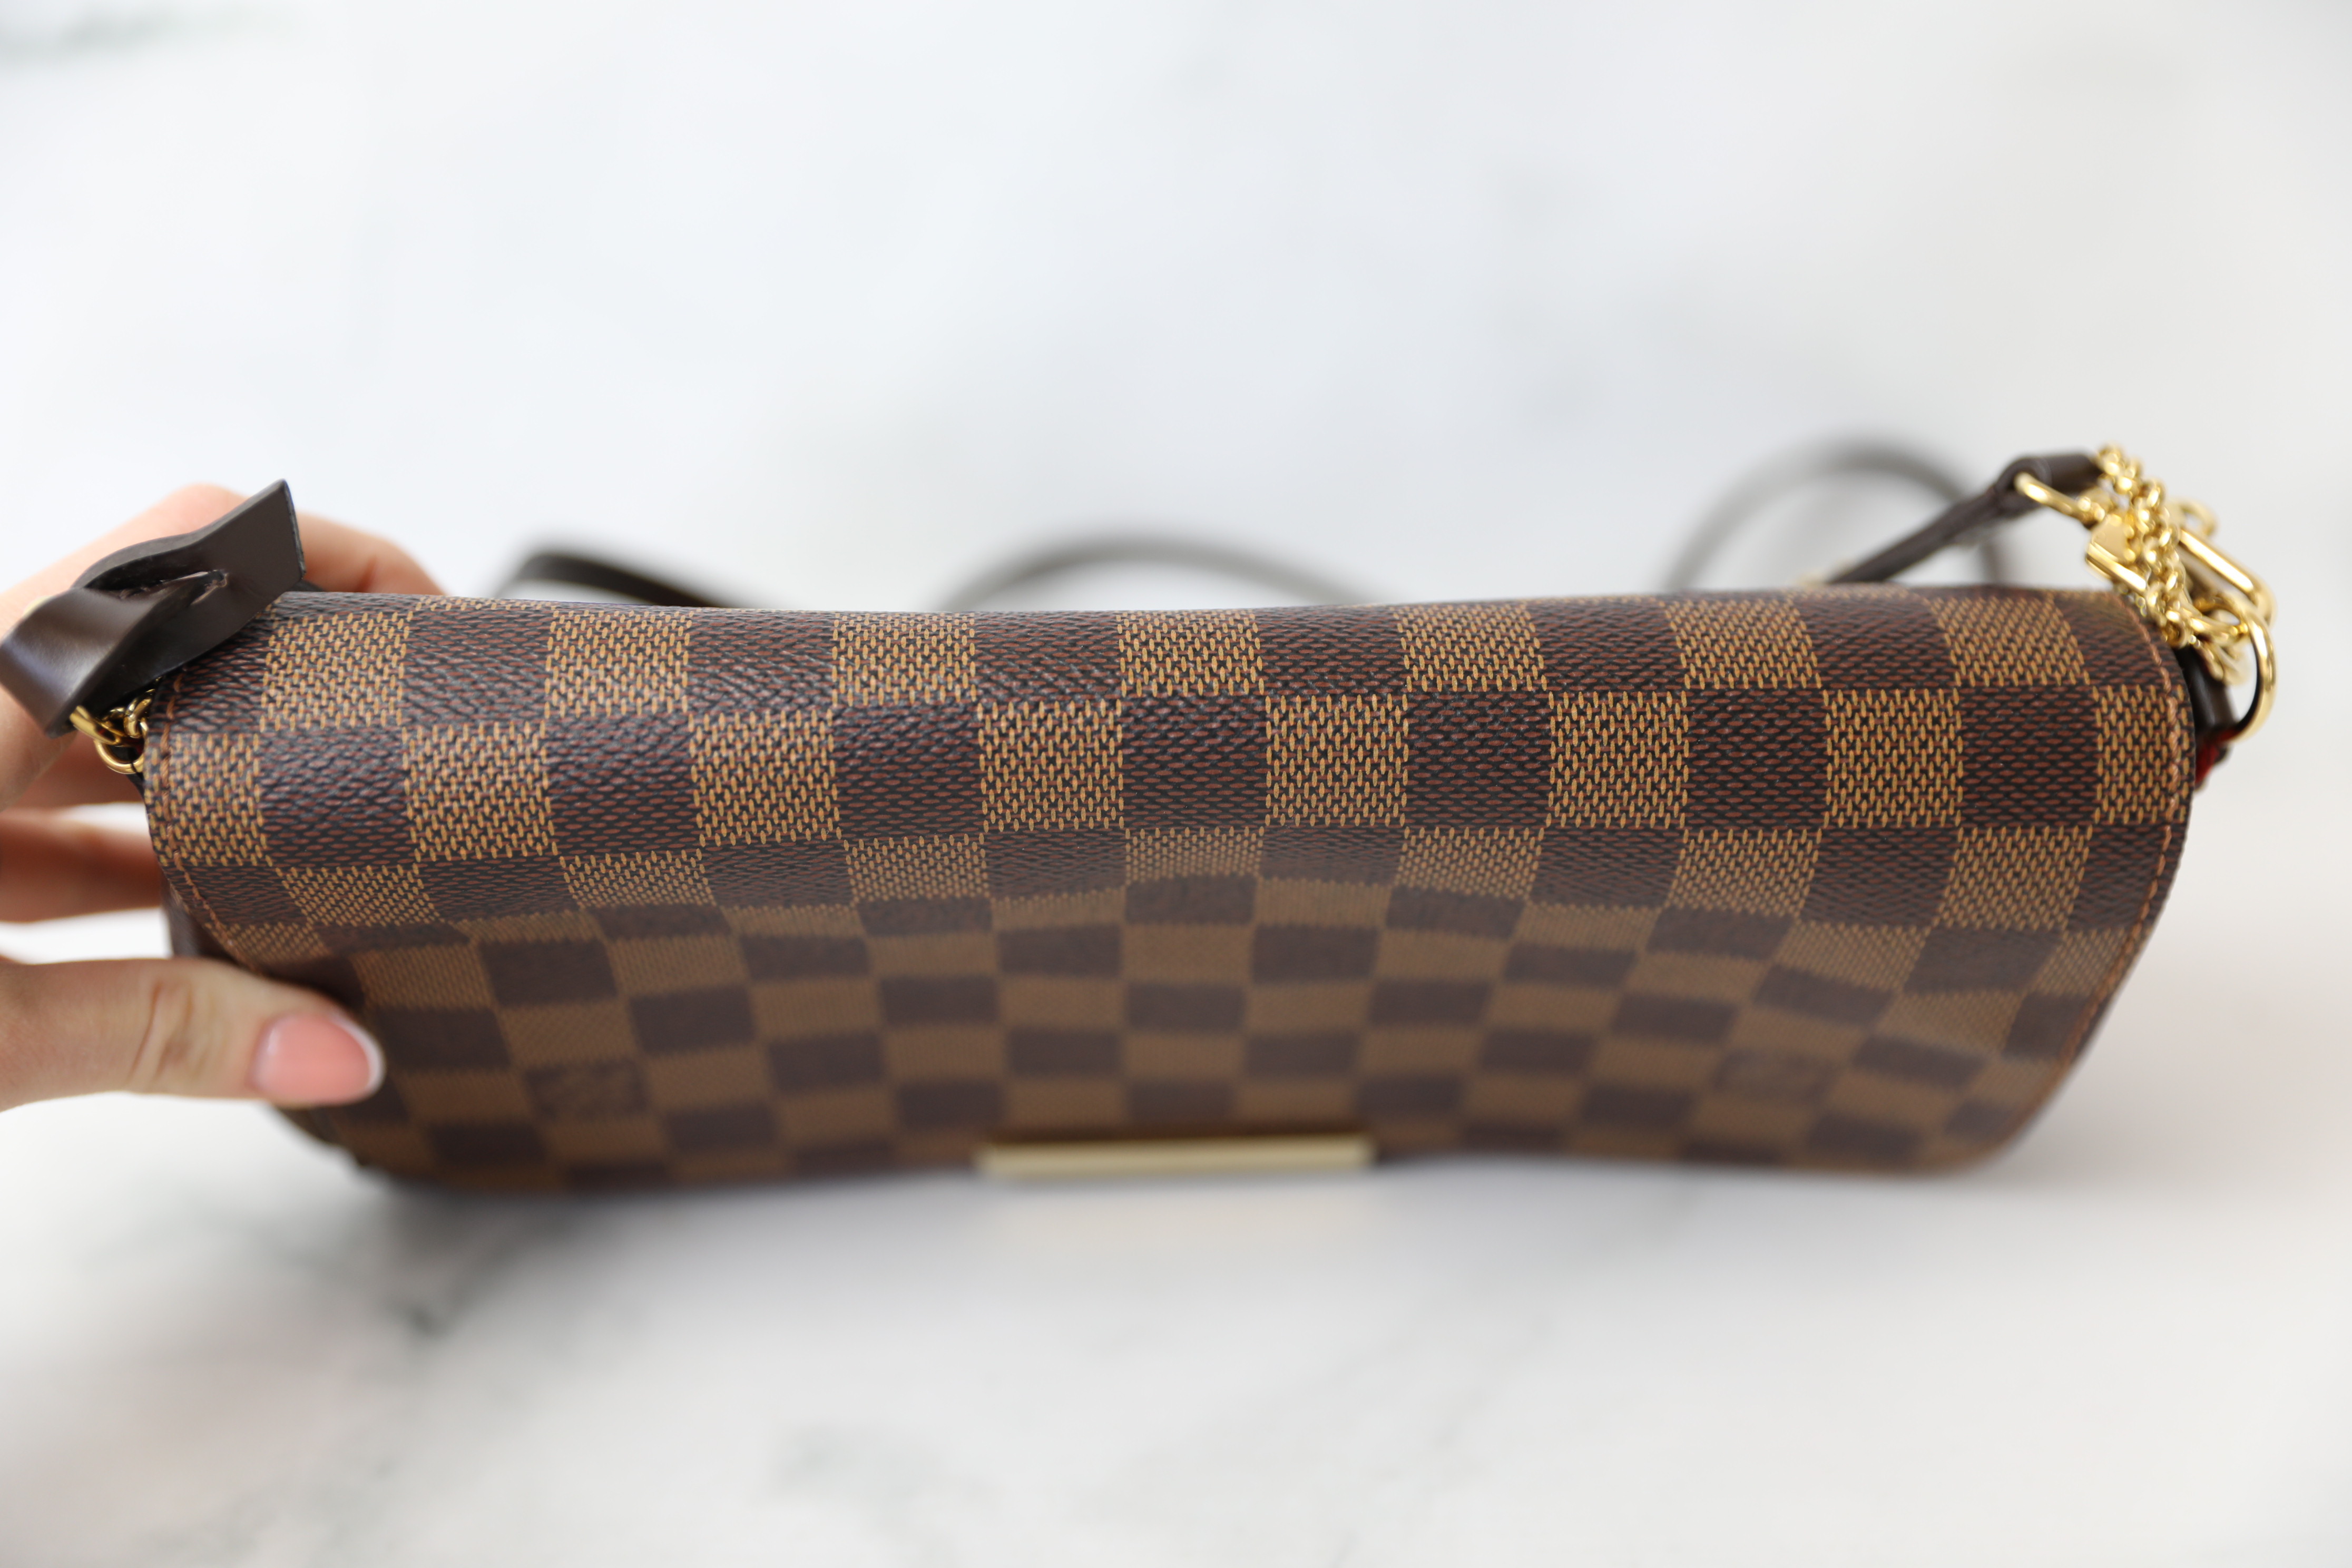 Unboxing My Louis Vuitton Favorite MM ,Boujee on a budget 